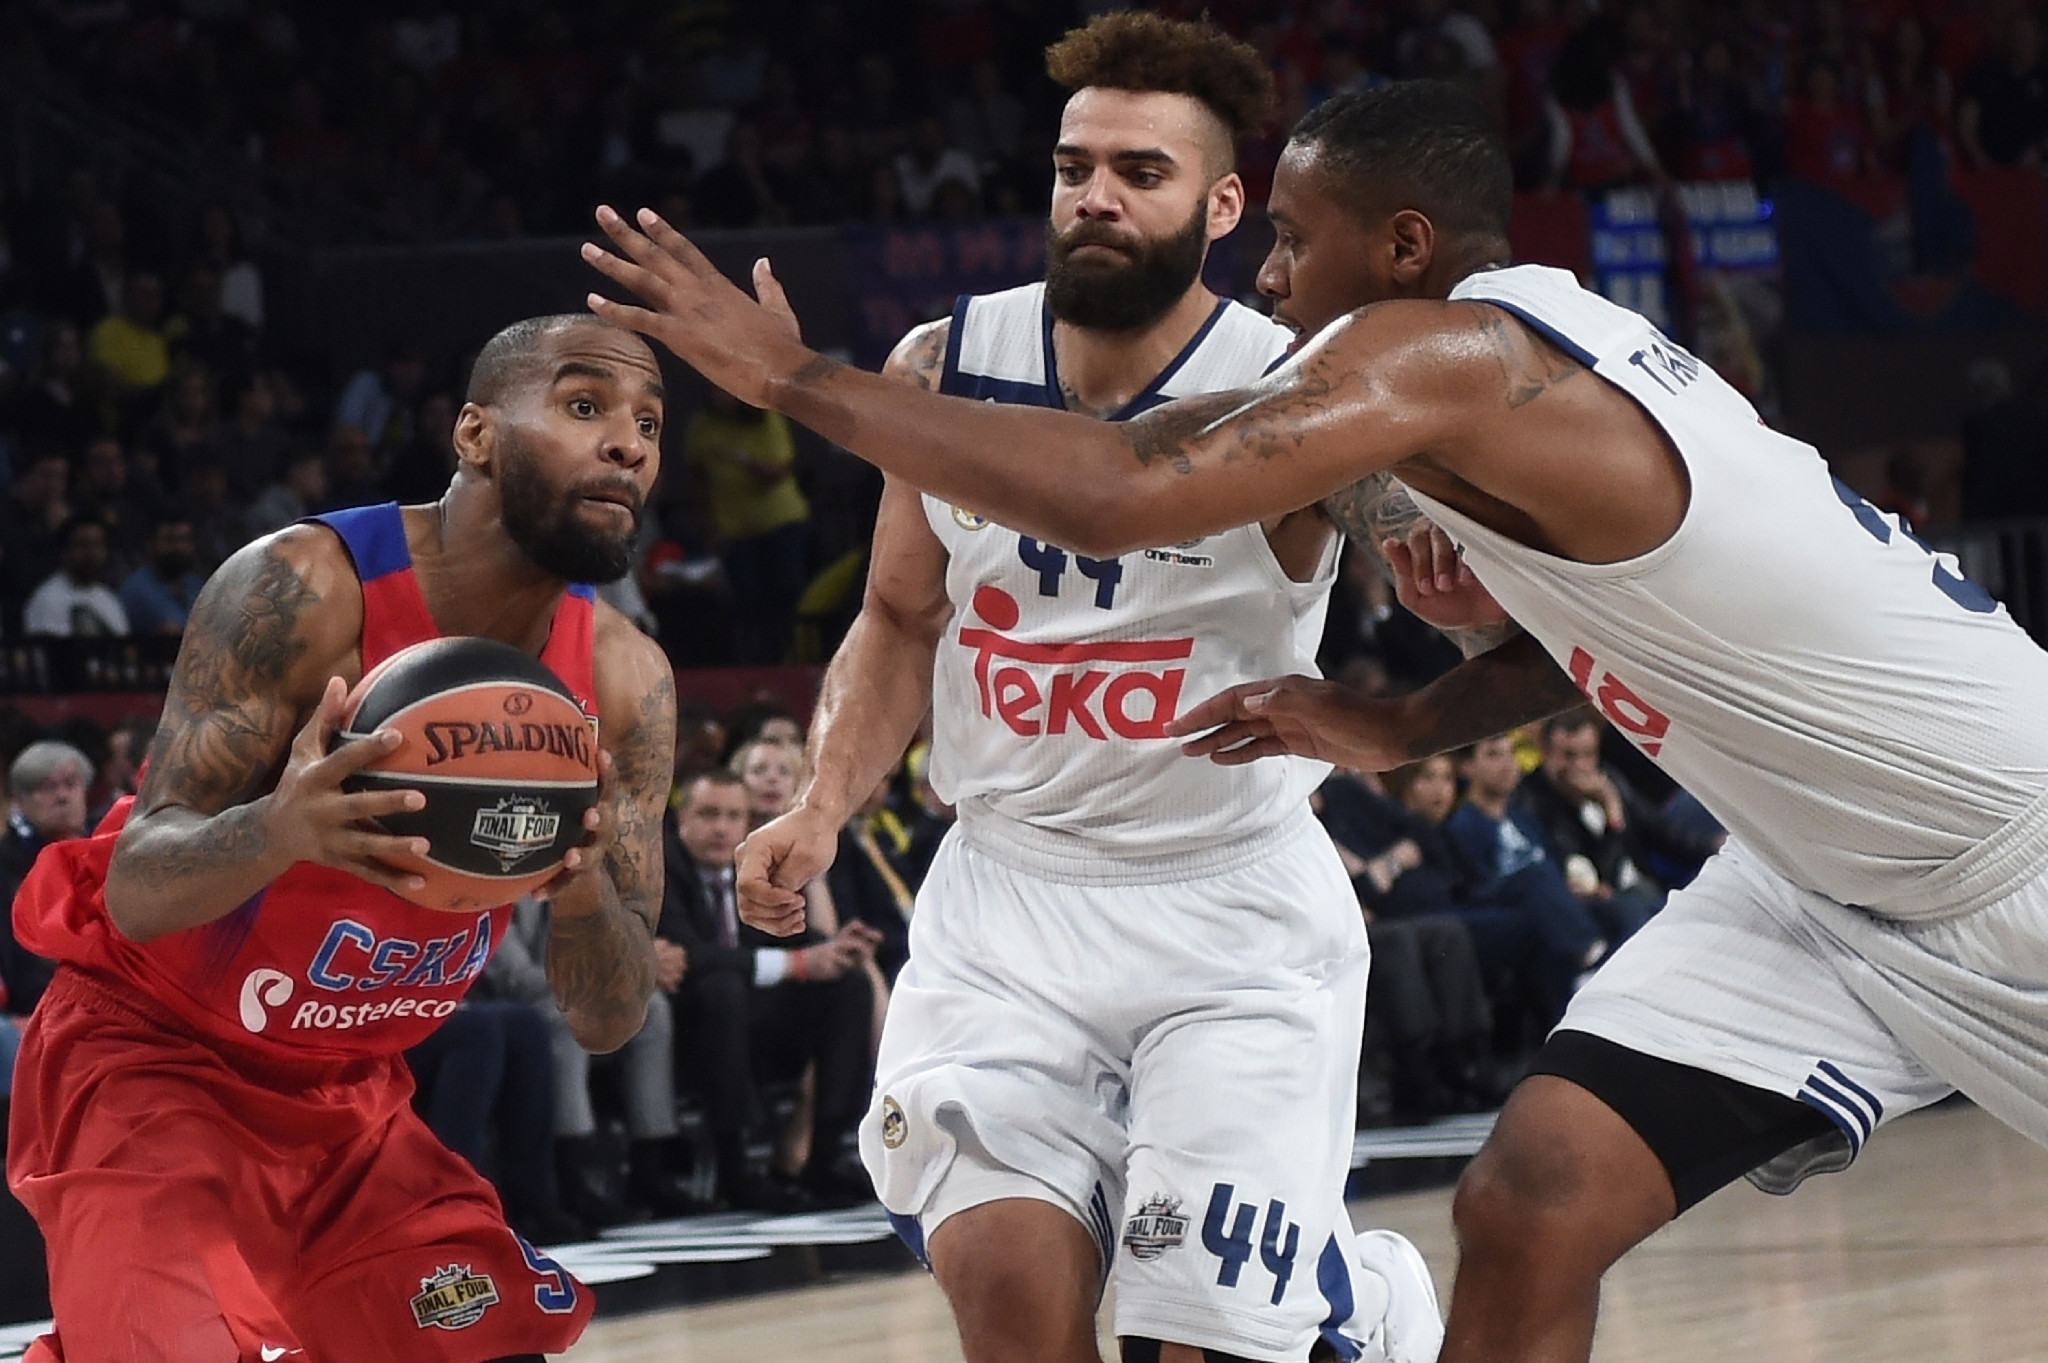 FIBA moves European qualifiers for 2019 Basketball World Cup in bid to ease bitter Euroleague dispute